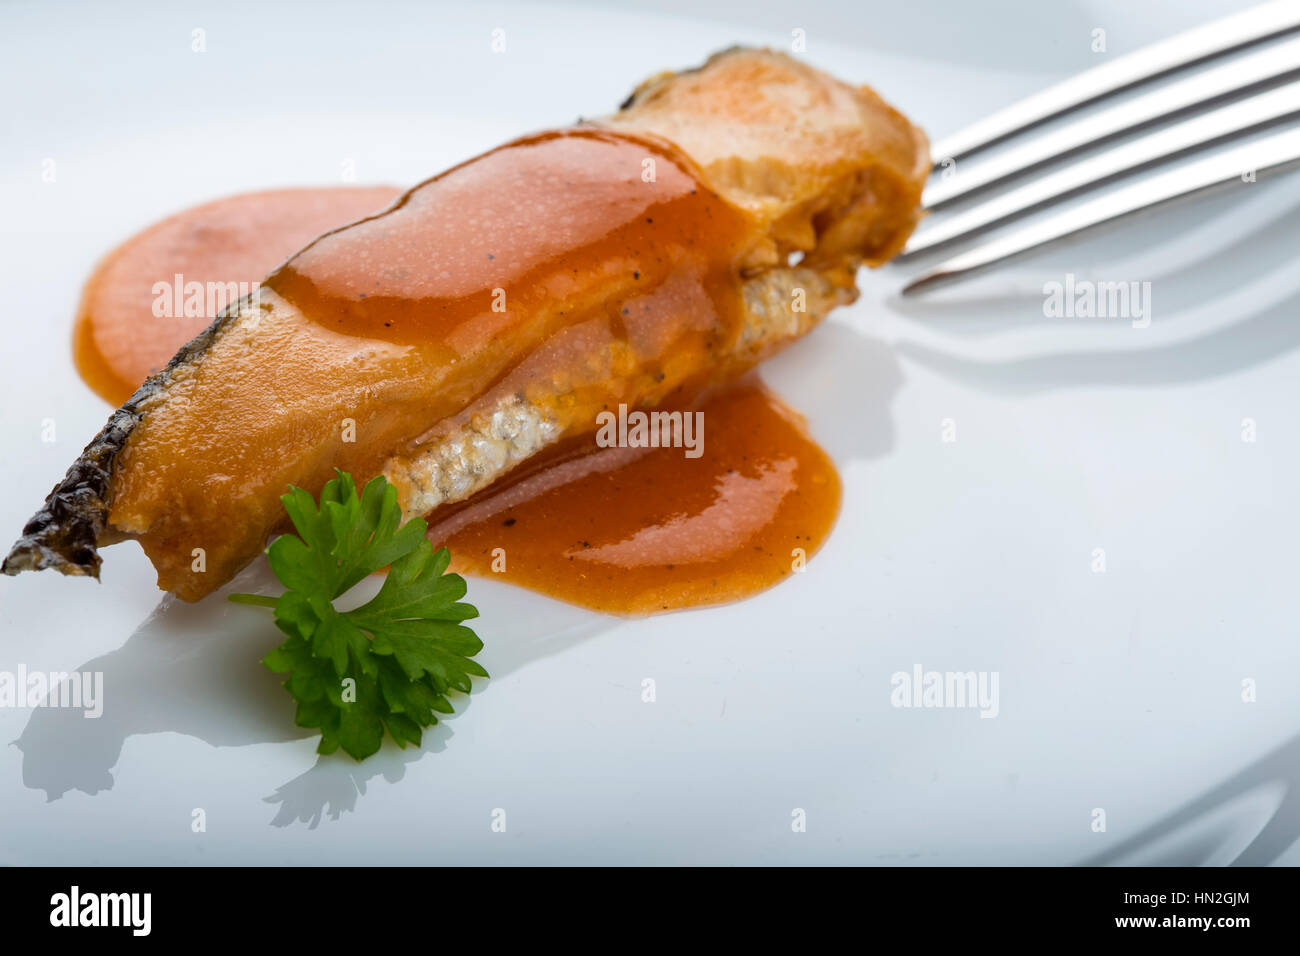 Marinated herring fish in tomato sauce on plate with parsley and fork in background Stock Photo